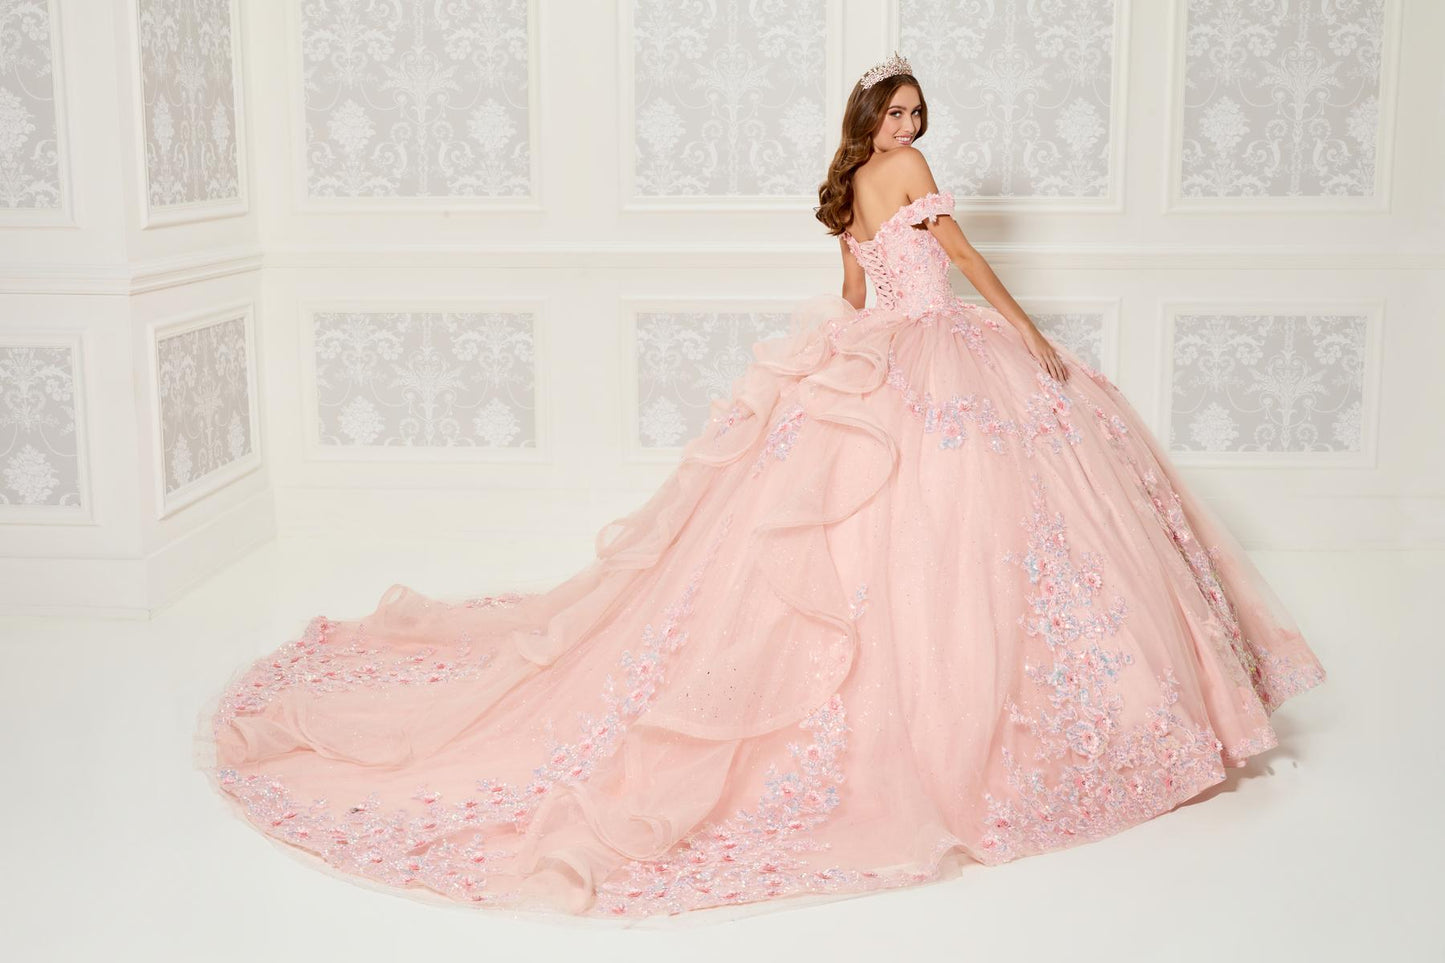 Quinceañera Dress in Beaded Lace and Shimmering Tulle with Floral Print PR30116